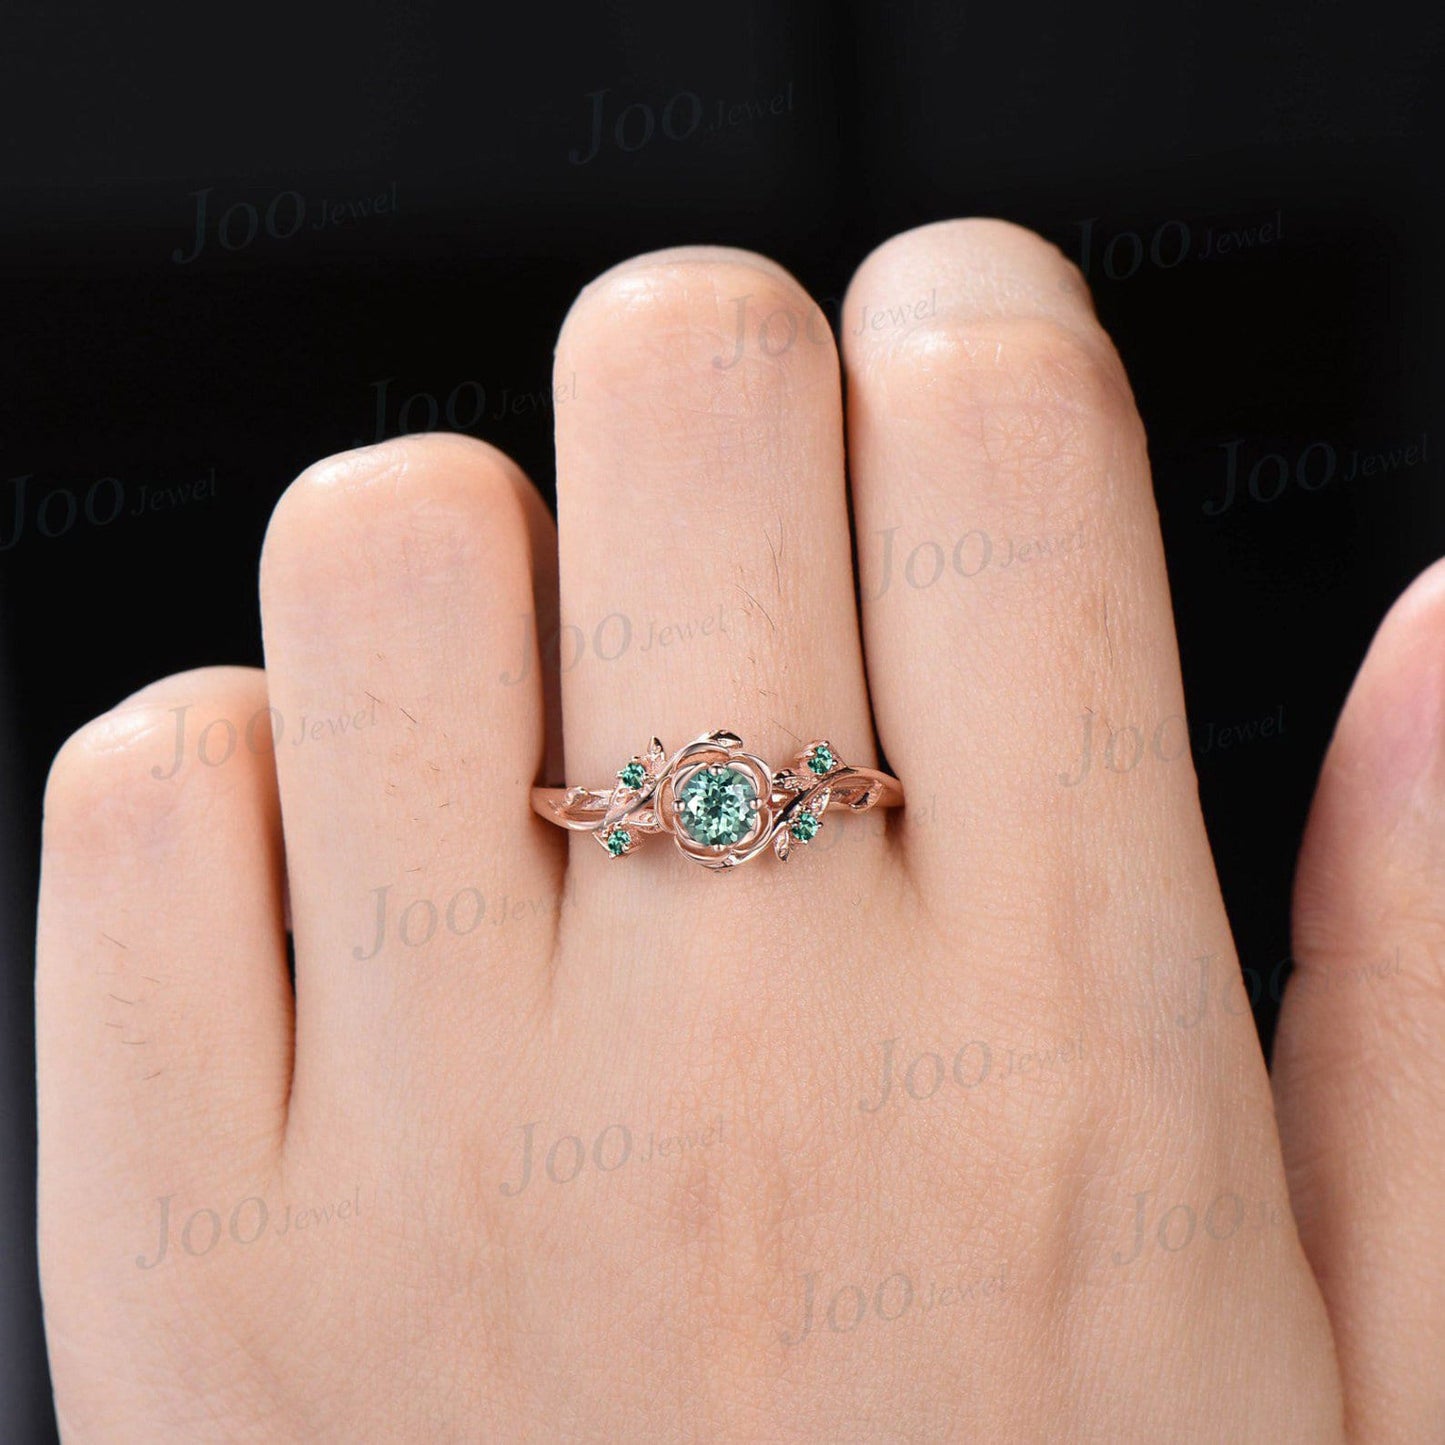 5mm Round Cut Green Sapphire Rose Flower Engagement Ring 10K Rose Gold Nature Inspired Wedding Ring Vintage Leaf Branch Green Emerald Ring